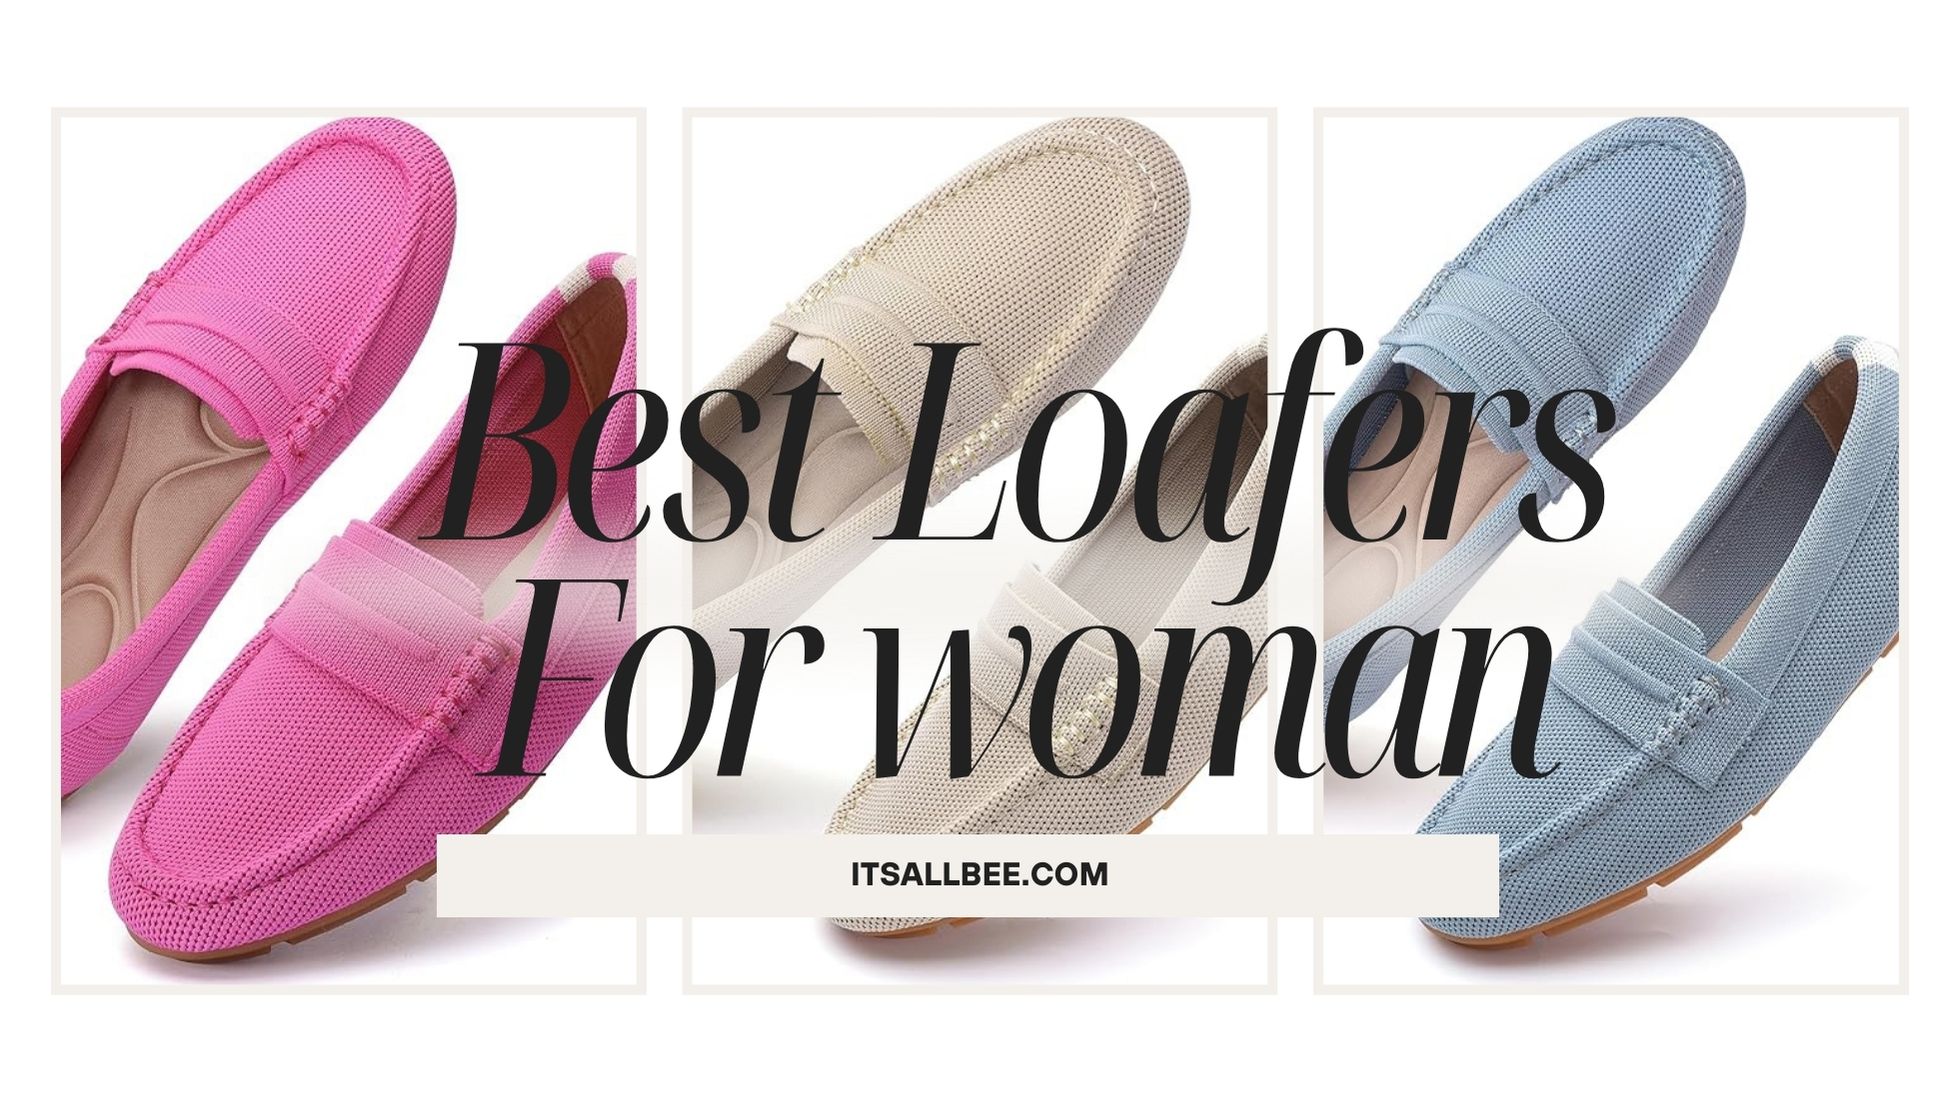 Discover the top-rated loafers on Amazon, handpicked for their style, comfort, and durability. From classic to contemporary designs, find the perfect pair for any occasion at unbeatable prices. Explore our expert selections, backed by customer reviews, to elevate your footwear collection today. Loafers For Women Outfit Casual | Best Black Loafers For Women | | Womens Loafers Outfit Summer | Best Loafers For Travel | Best Loafers For Women | Best Loafers For Walking | | Best Loafers For Work